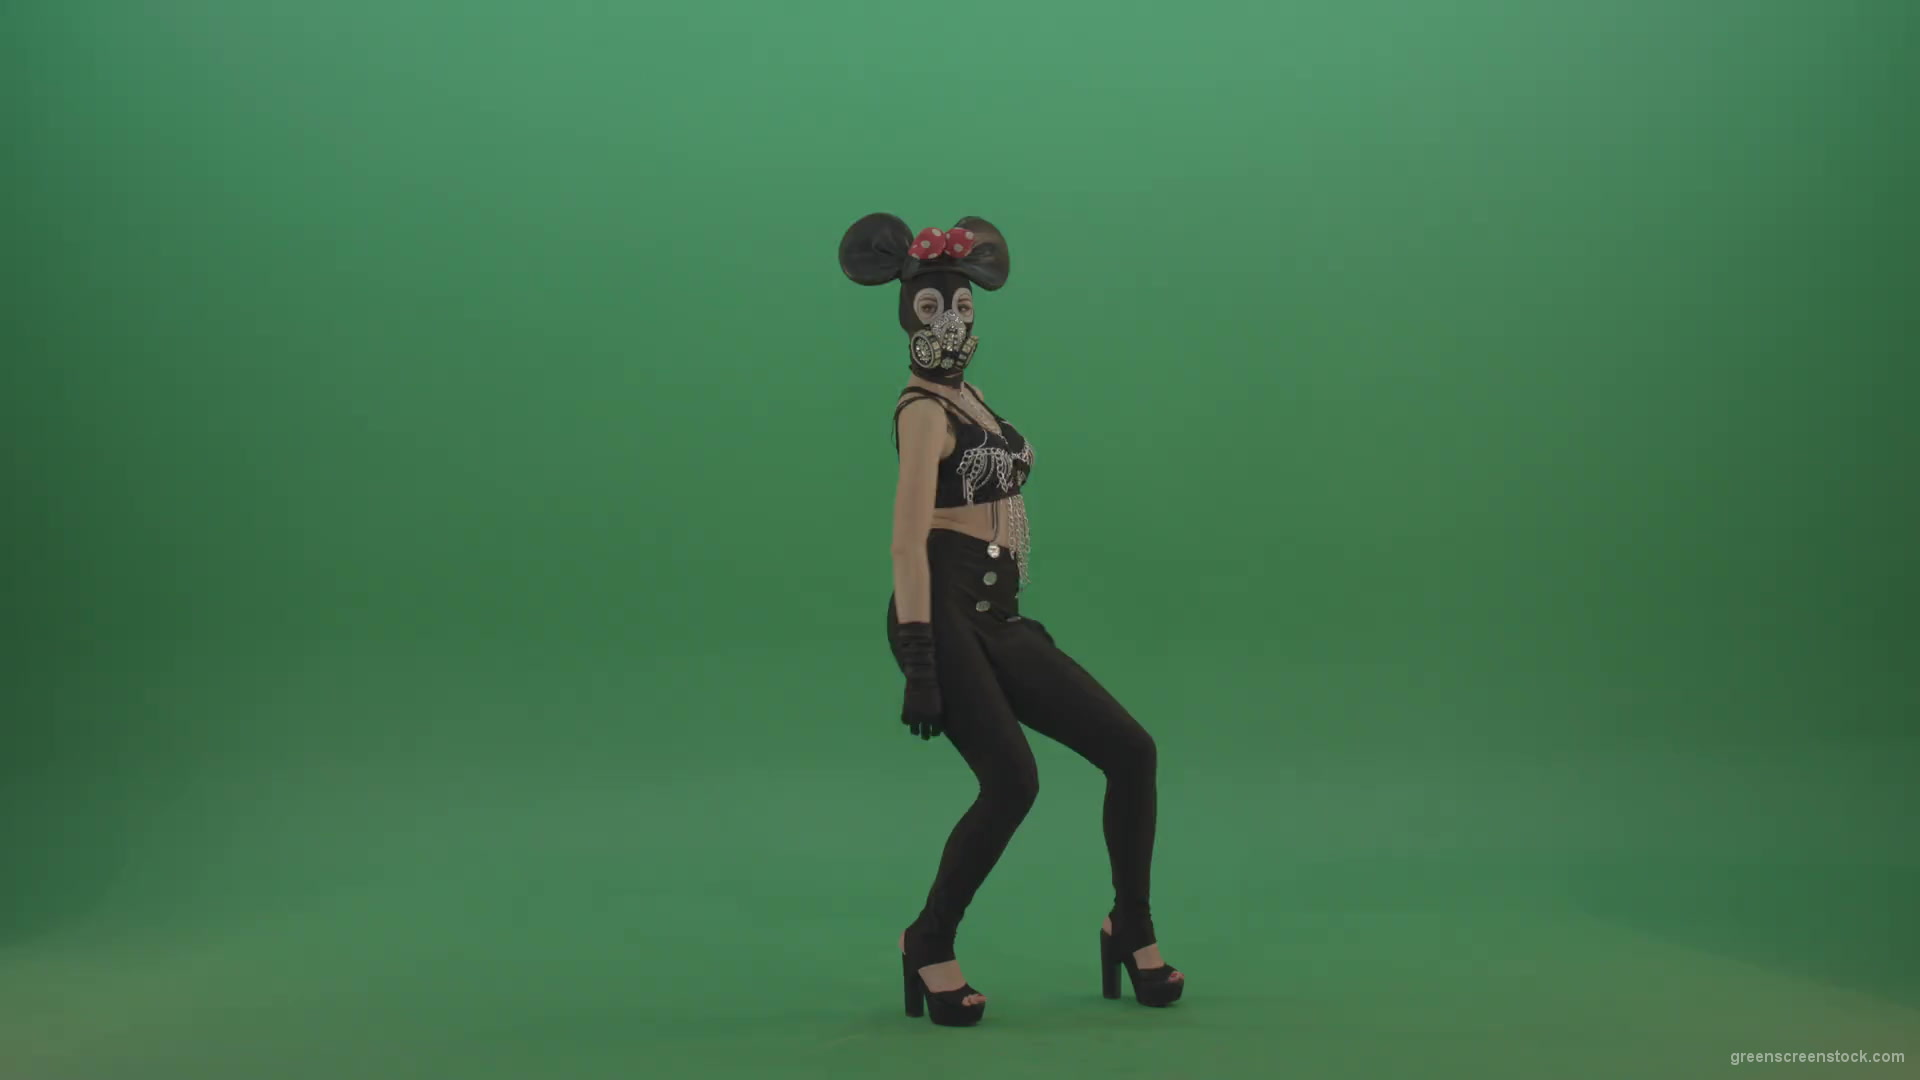 Sexy-dancing-mouse-girl-slowly-dance-in-mask-on-green-screen-1920_001 Green Screen Stock